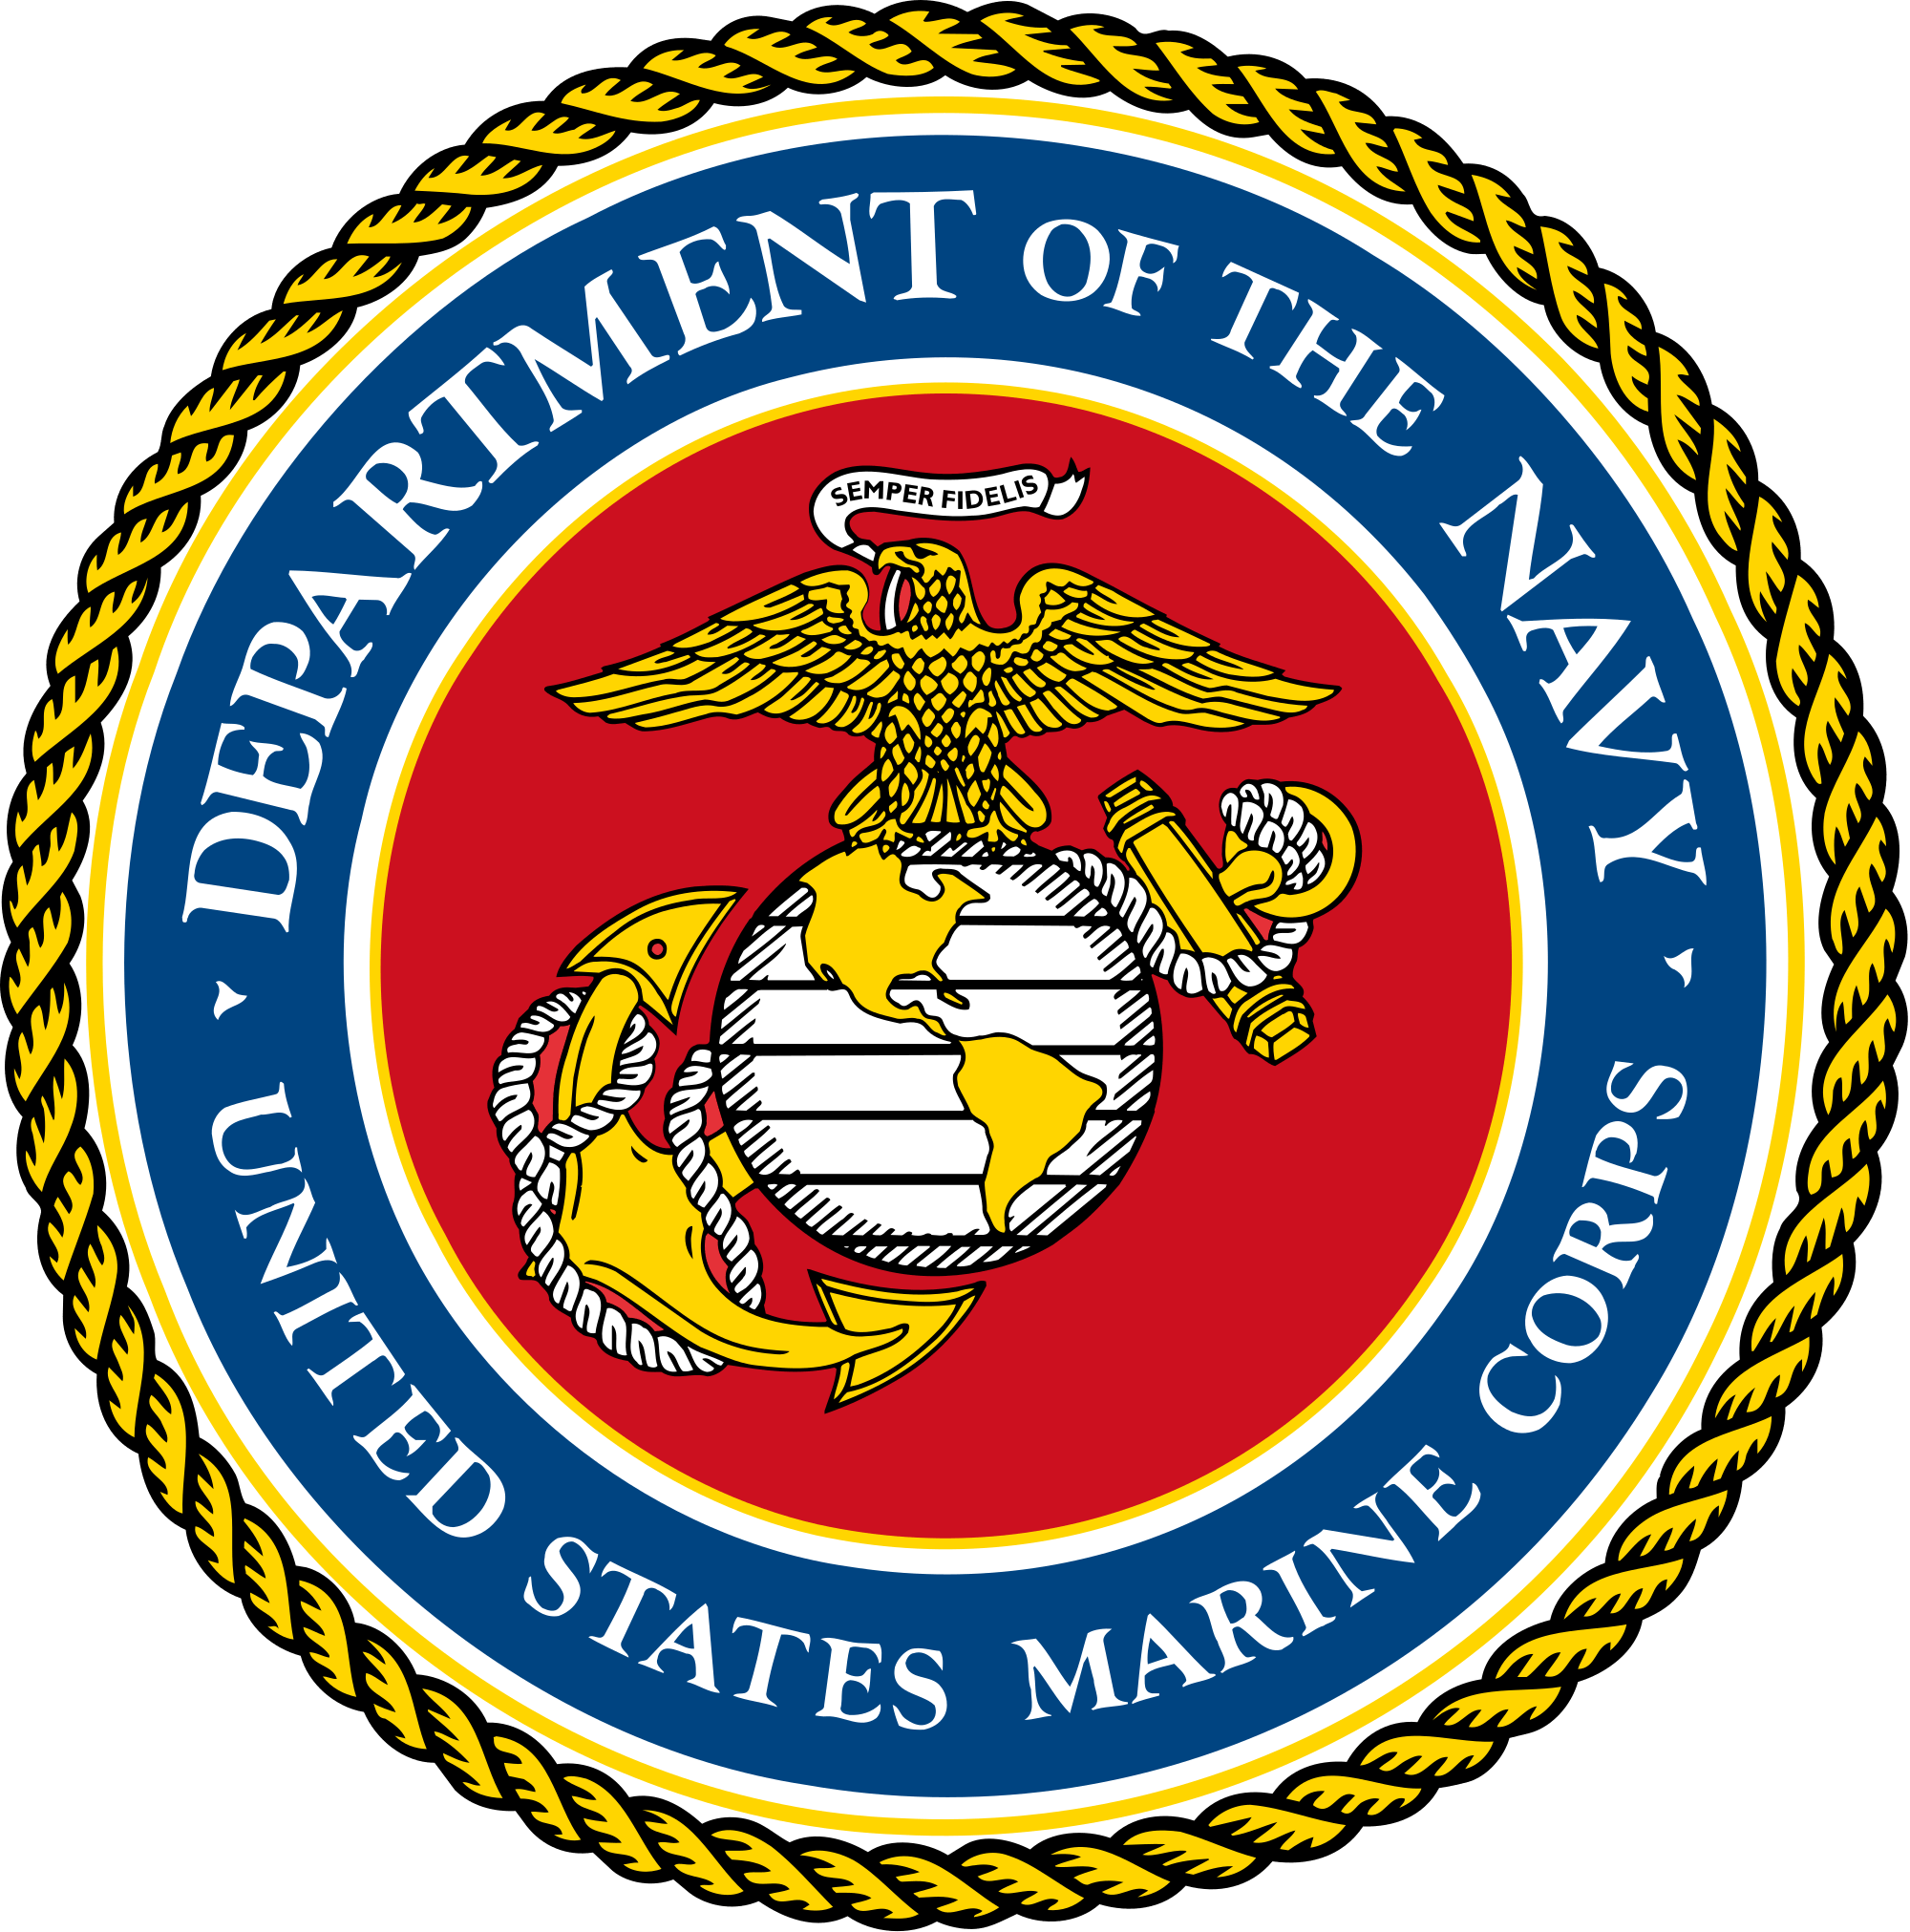 US Marines Logo - File:Seal of the United States Marine Corps.svg - Wikimedia Commons